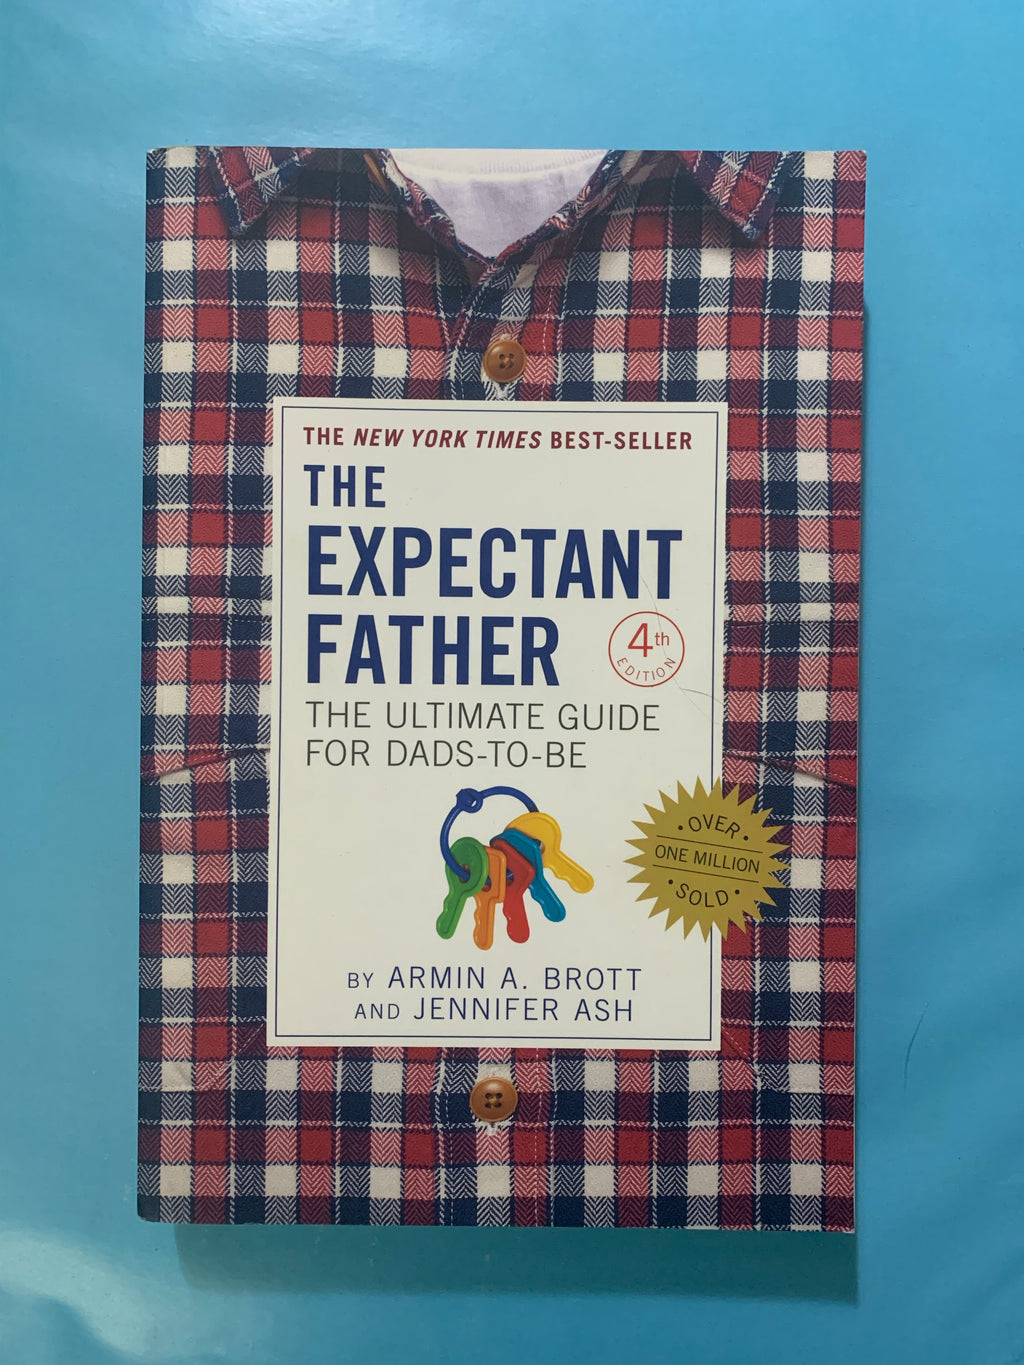 The Expectant Father: The Ultimate Guide for Dads-to-Be- By Armin A. Brott and Jennifer Ash